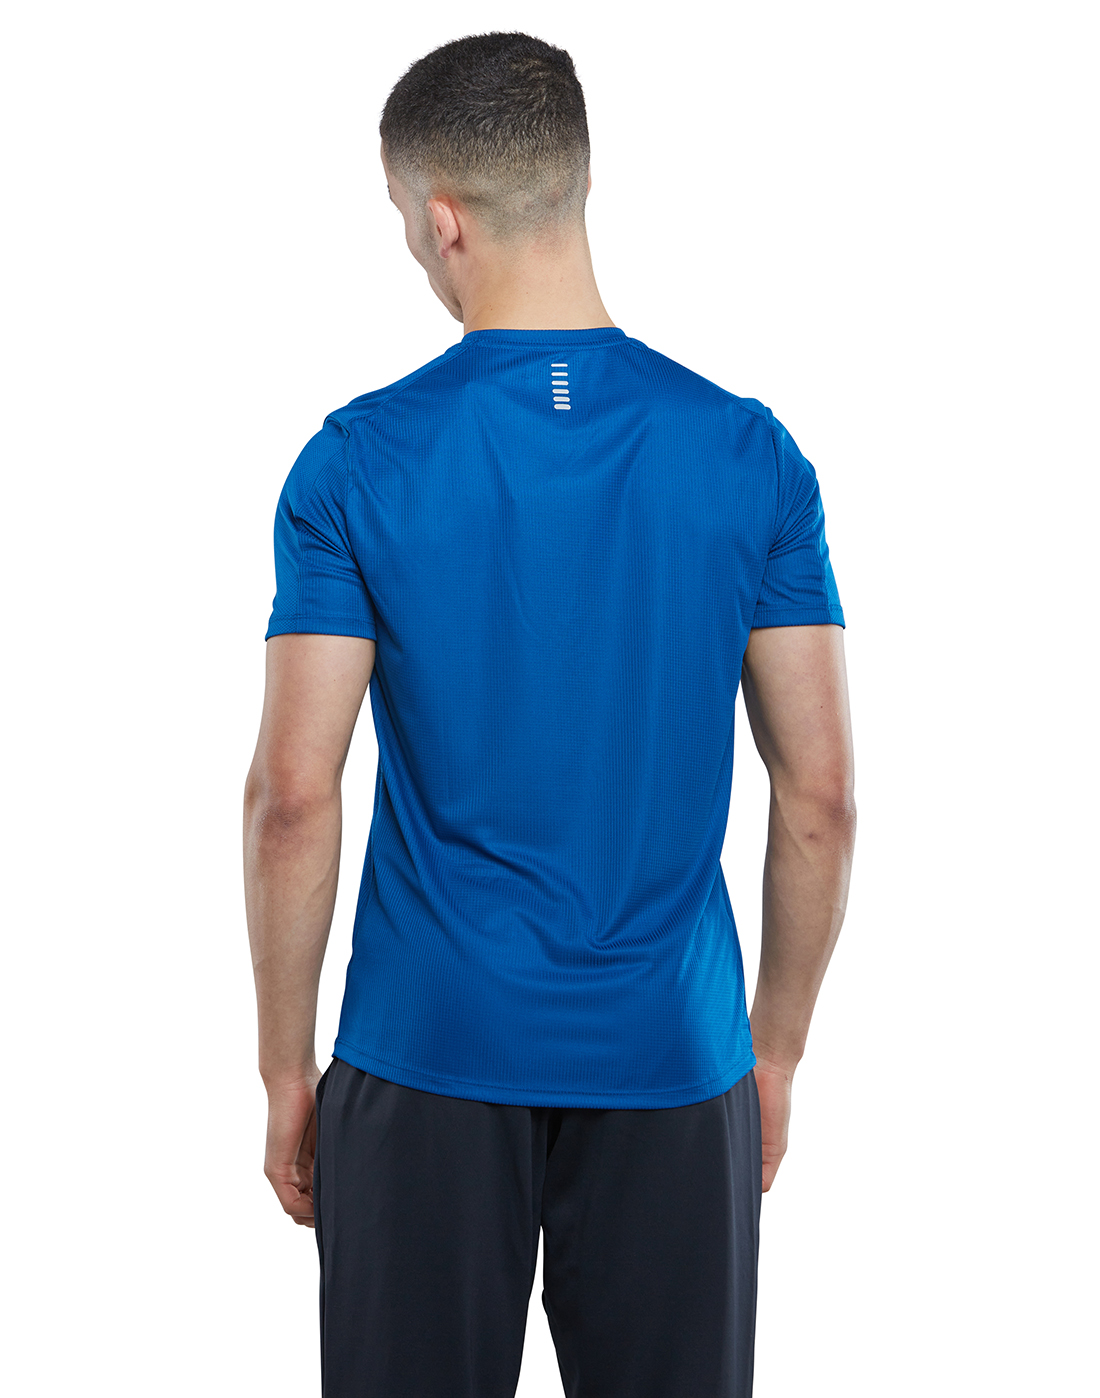 Under Armour Mens Speed Stride T-Shirt - Blue | Life Style Sports IE